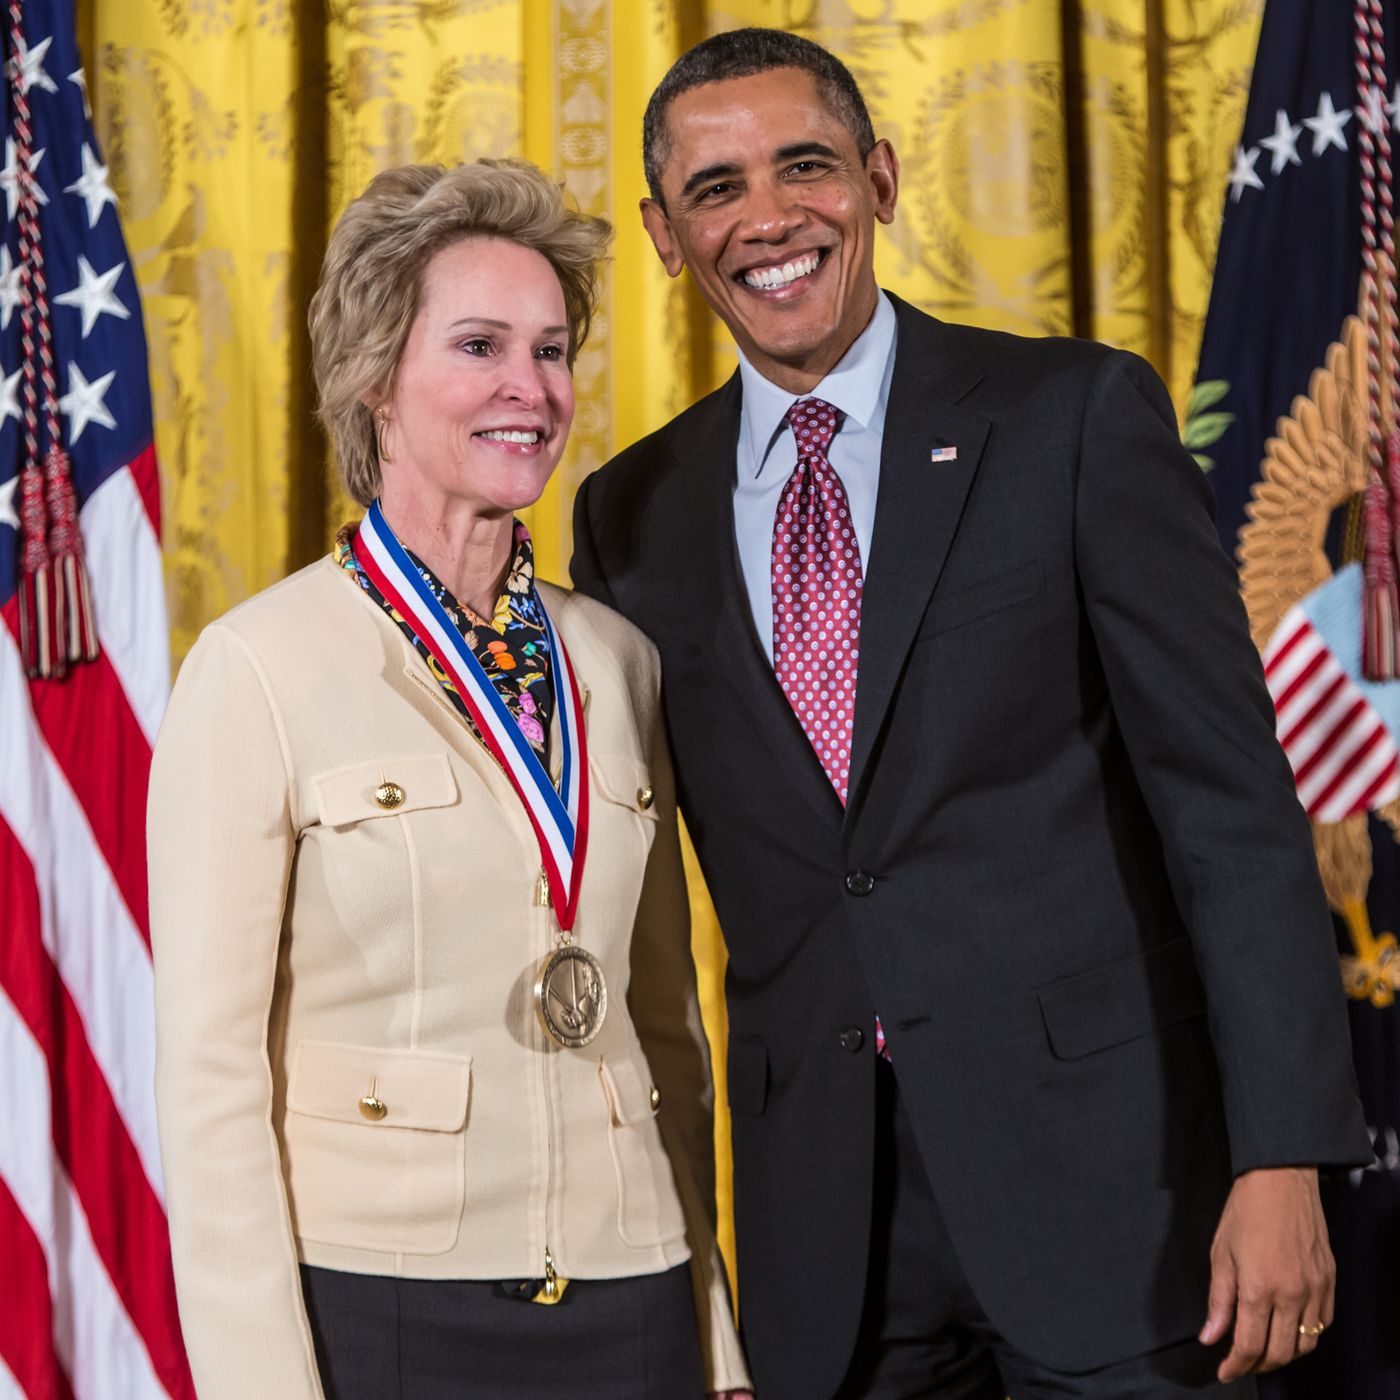 Receiving the National Medal of Technology and Innovation